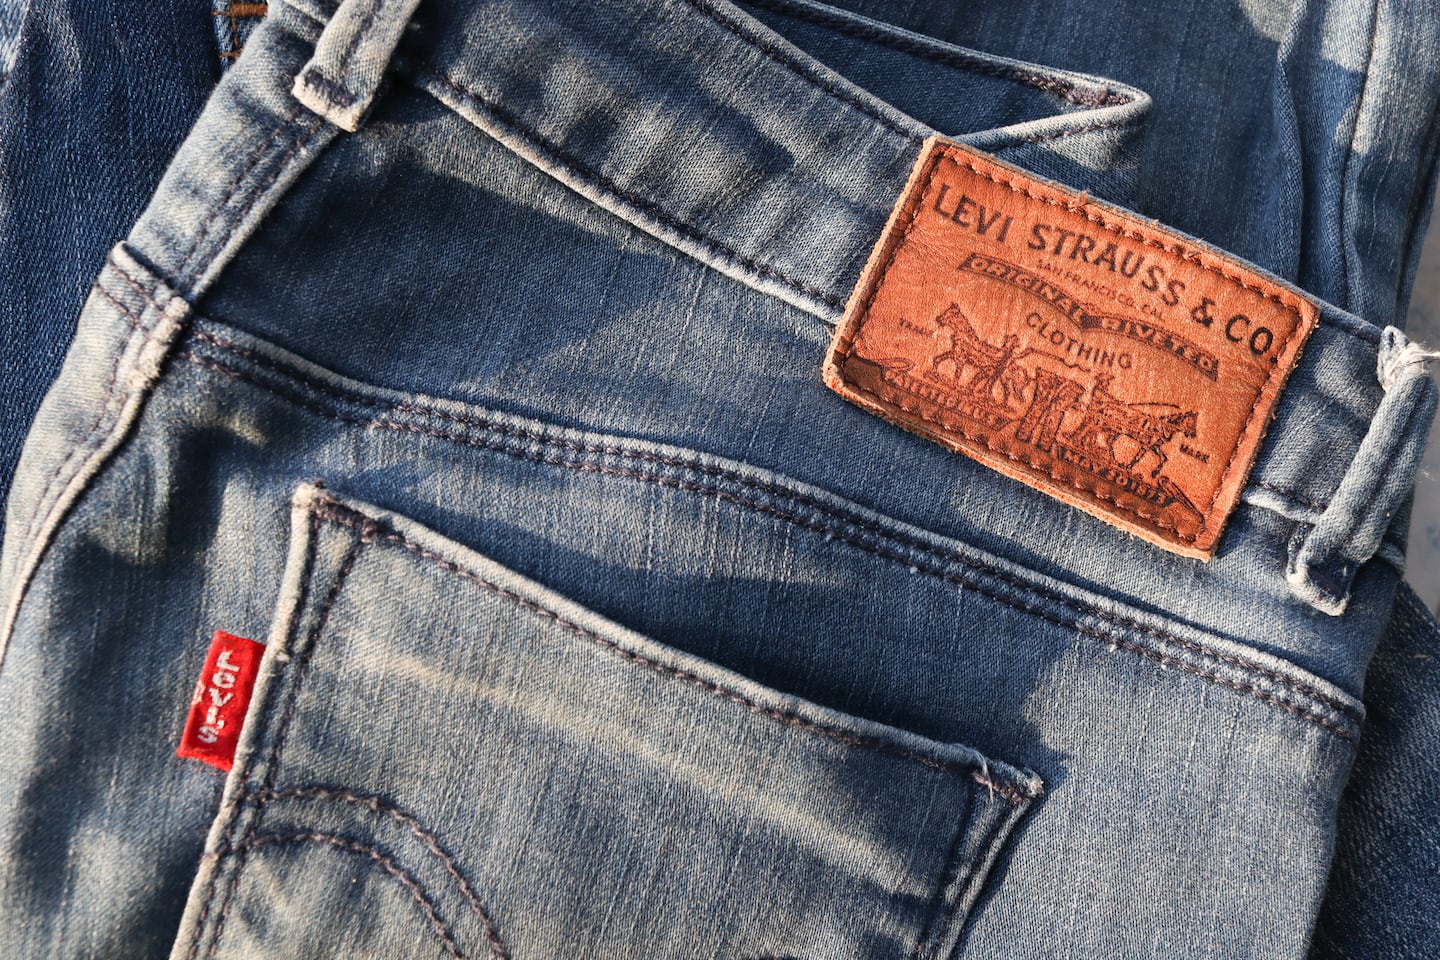 Levi Strauss Sues Italy’s Brunello Cucinelli Over Trademarked Tab | BoF